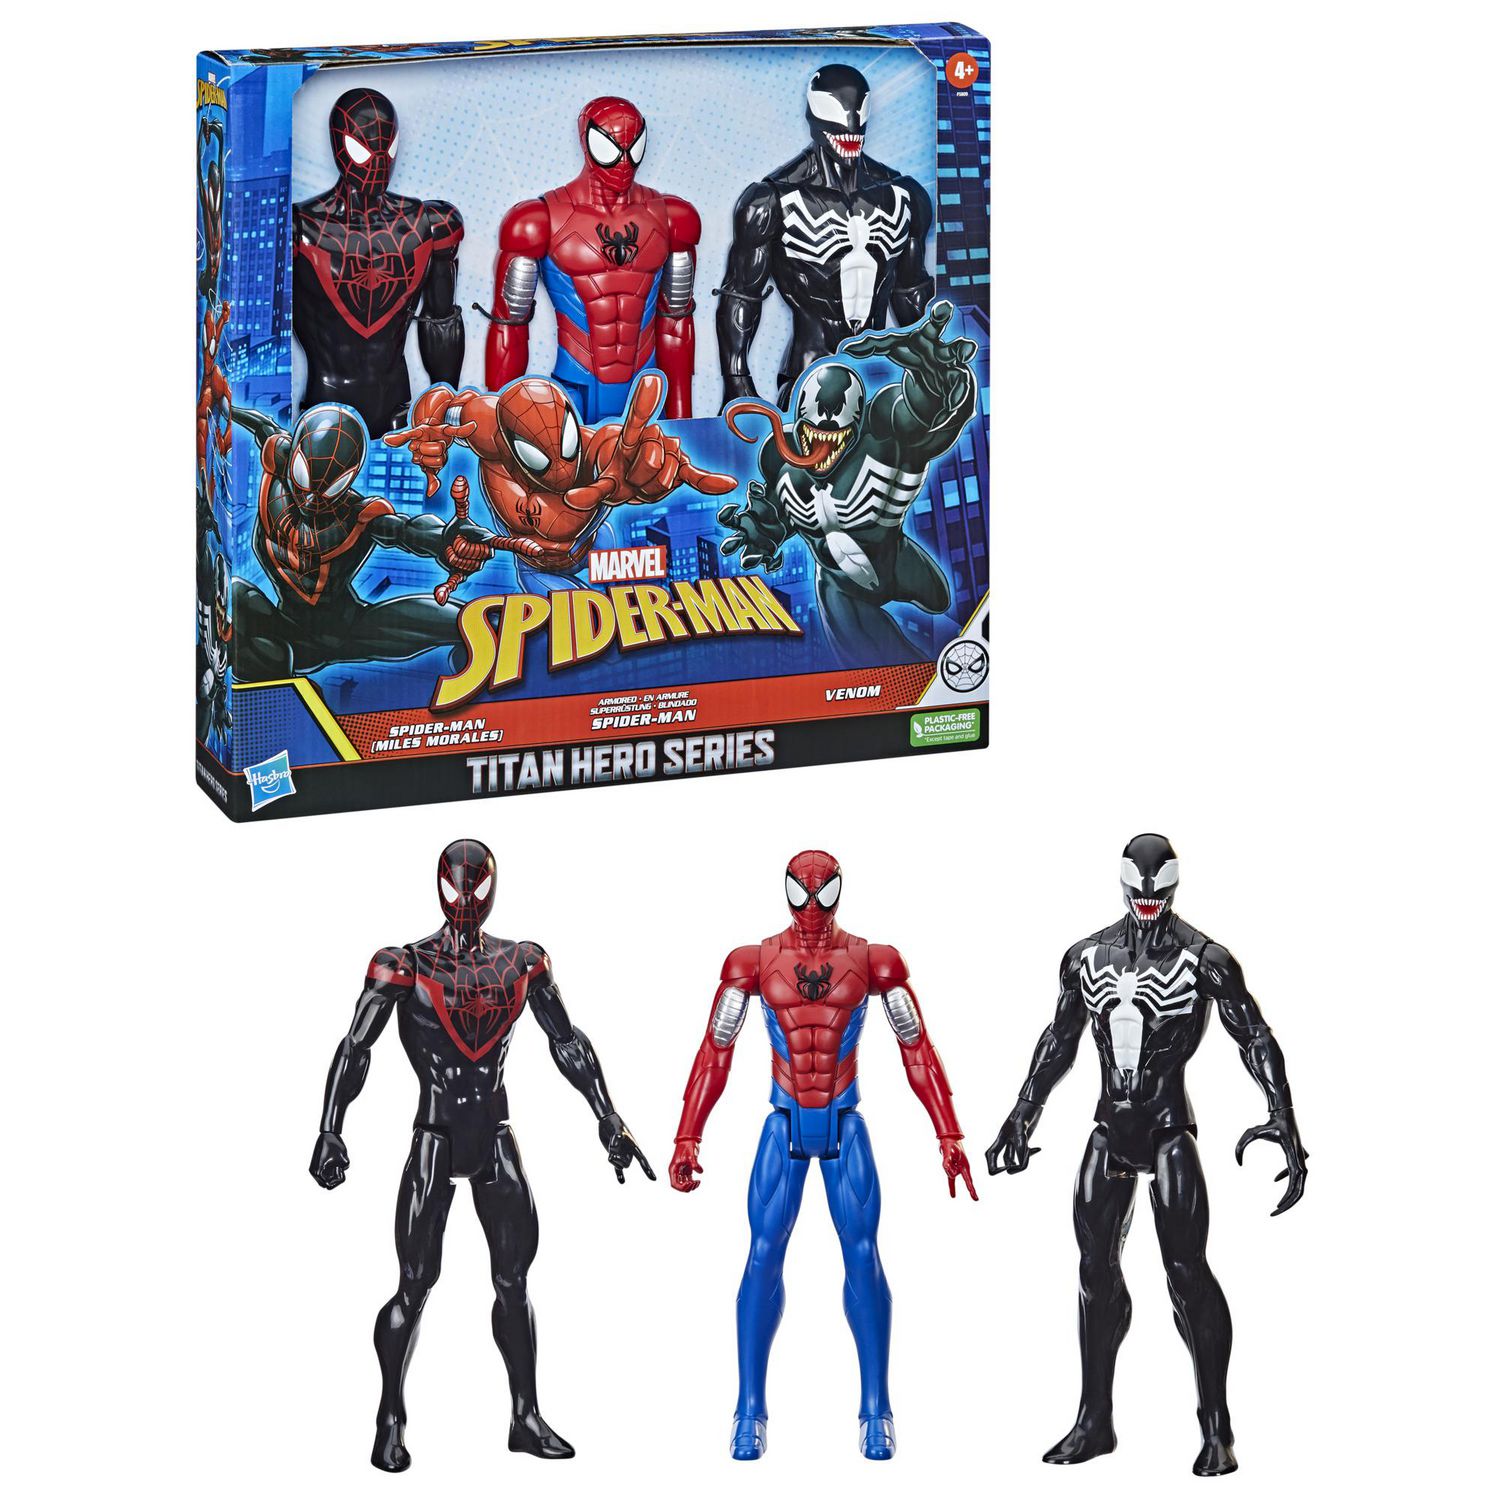 Marvel Spider-Man Titan Hero Series Spider-Man (Miles Morales) Armored  Spider-Man Venom 12-Inch-Scale Action Figure 3-Pack for Ages 4 and Up |  Walmart Canada